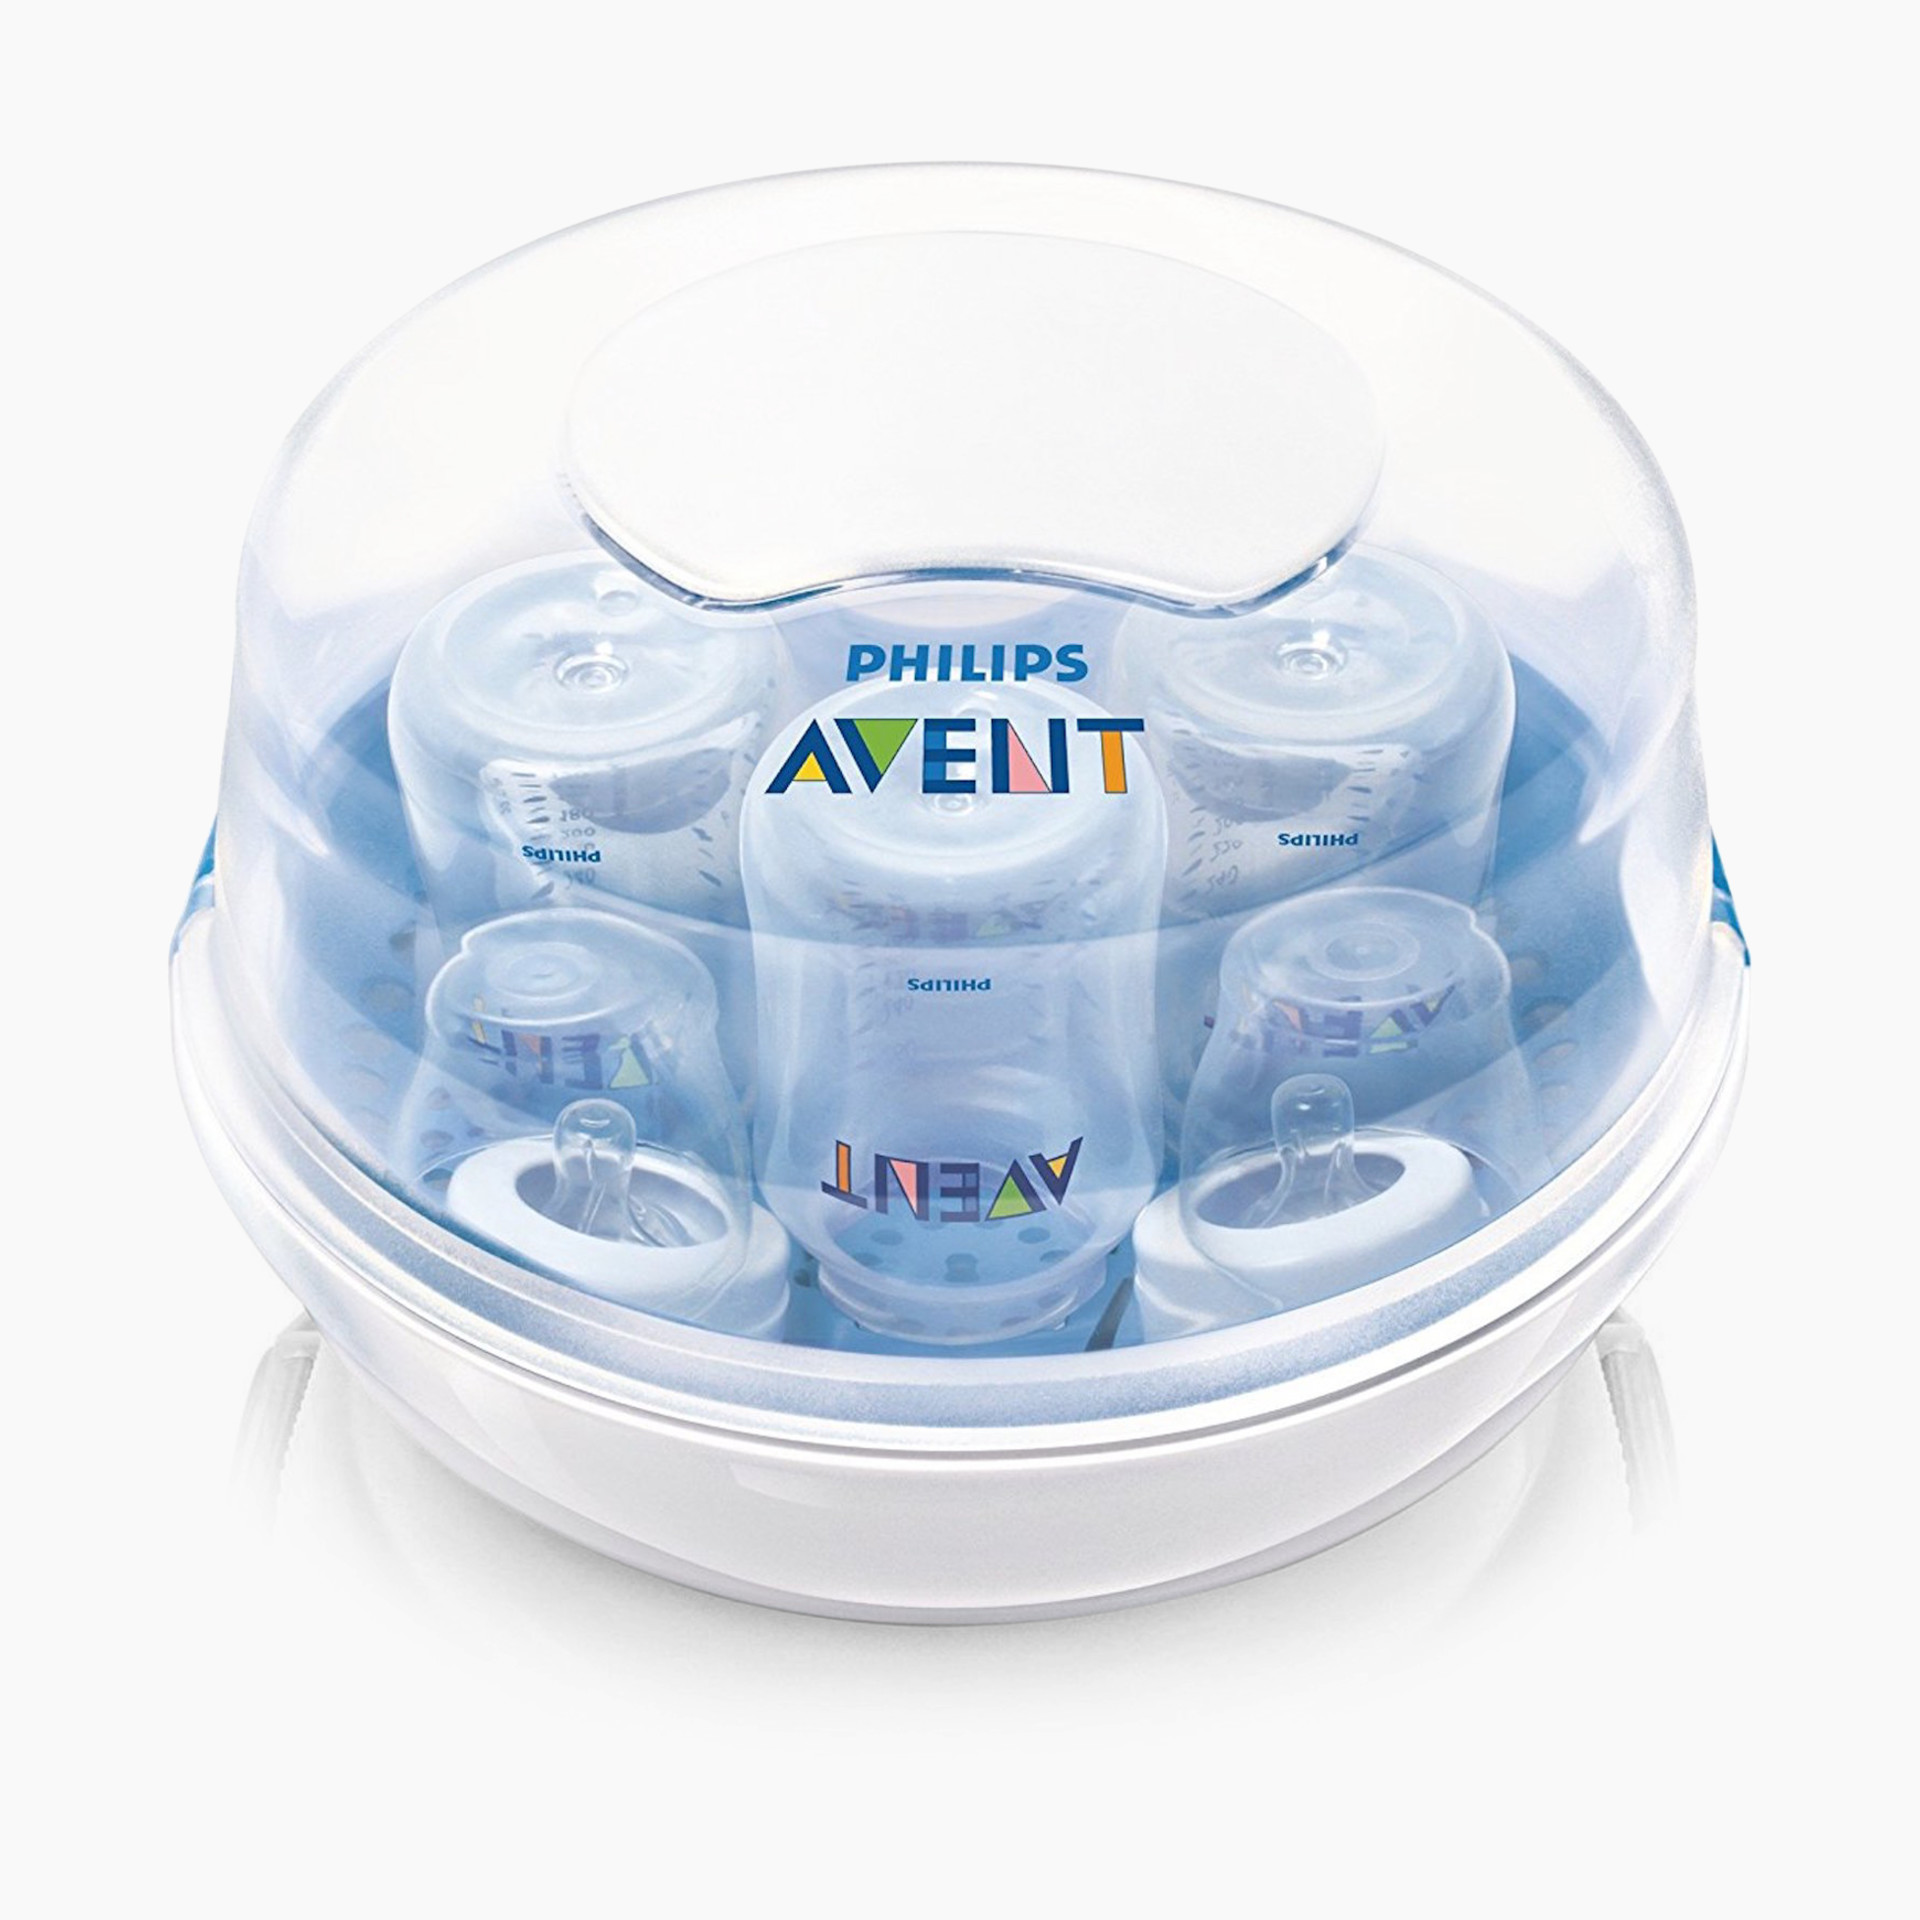  Philips Avent 3-in-1 Electric Steam Sterilizer for Baby  Bottles, Pacifiers, Cups and More : Baby Bottle Sterilizers : Baby